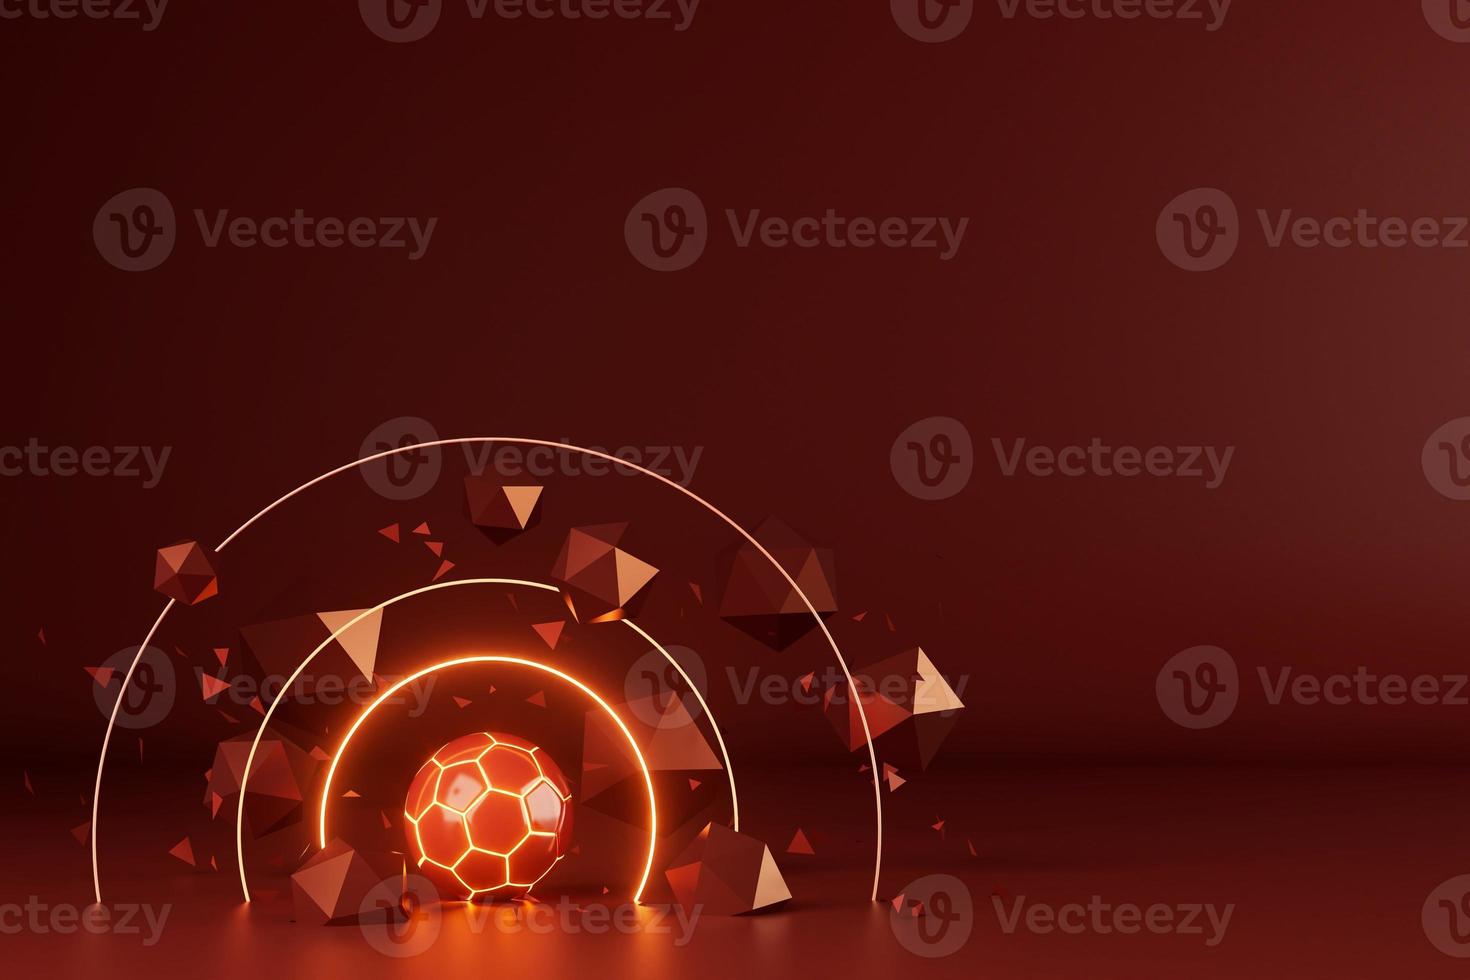 3d football object design. realistic rendering. abstract futuristic background. 3d illustration. motion geometry concept. sport competition graphic. tournament game bet content. soccer ball element. photo